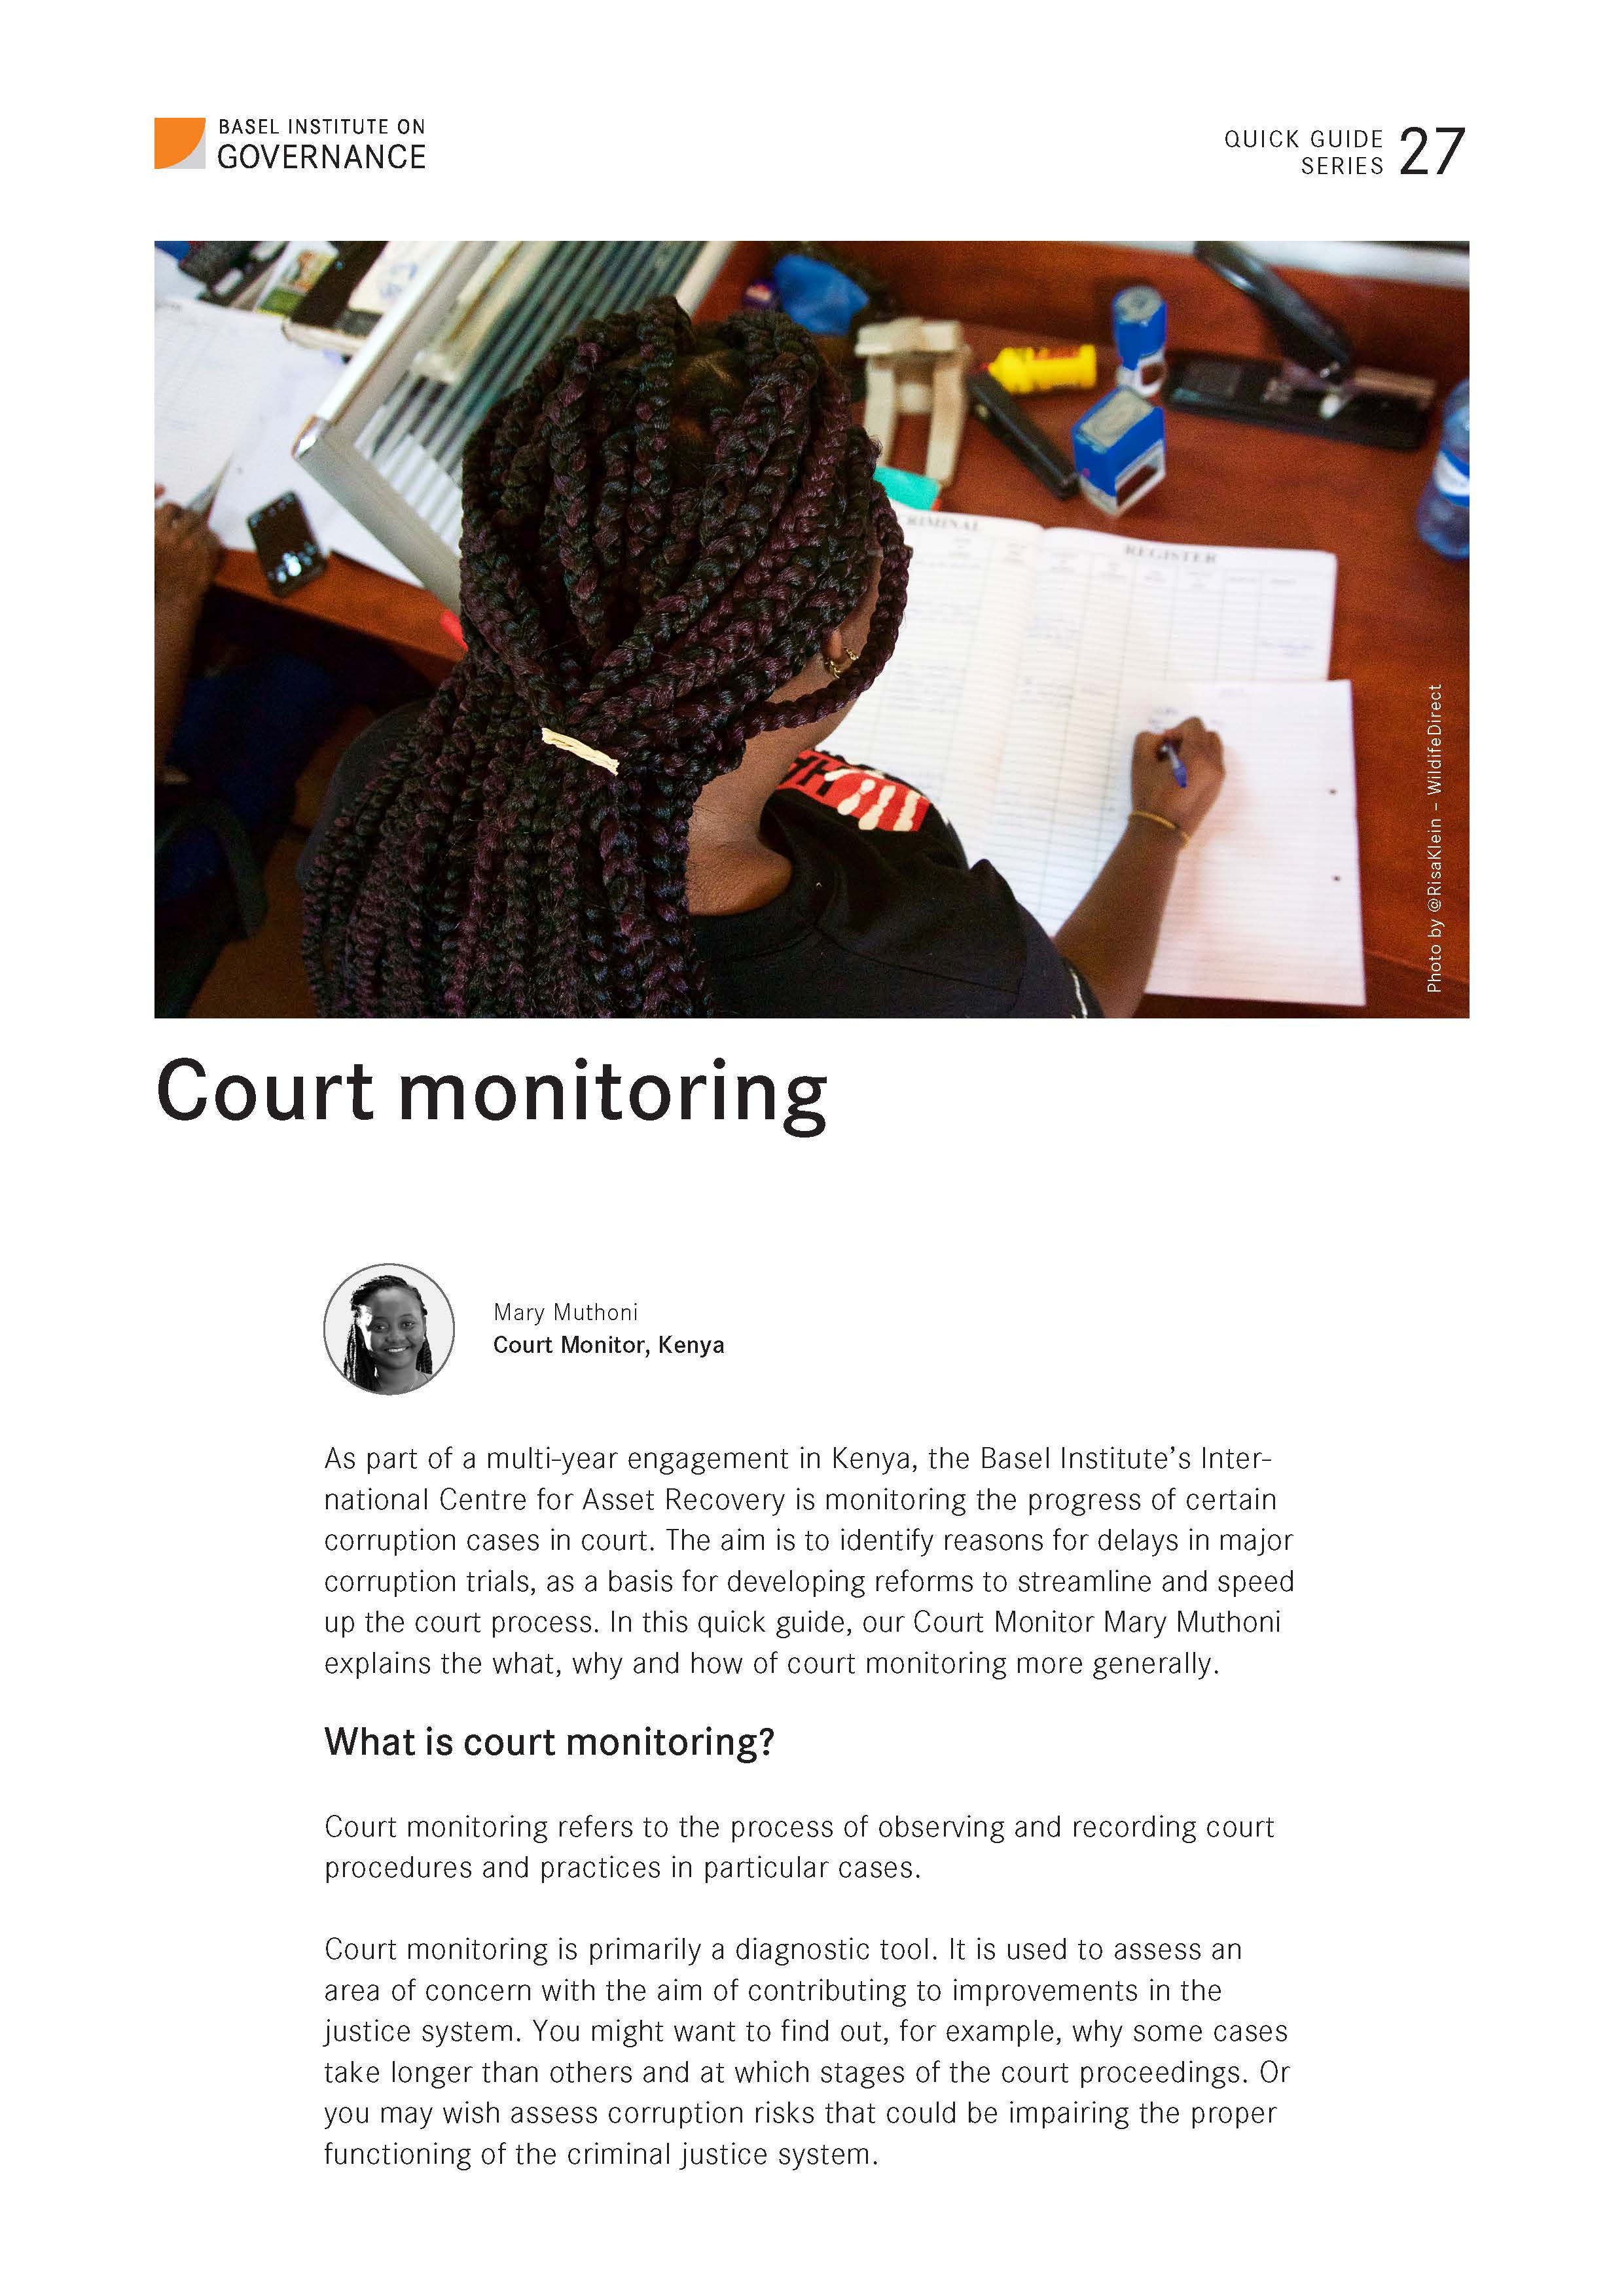 Cover page of quick guide to court monitoring